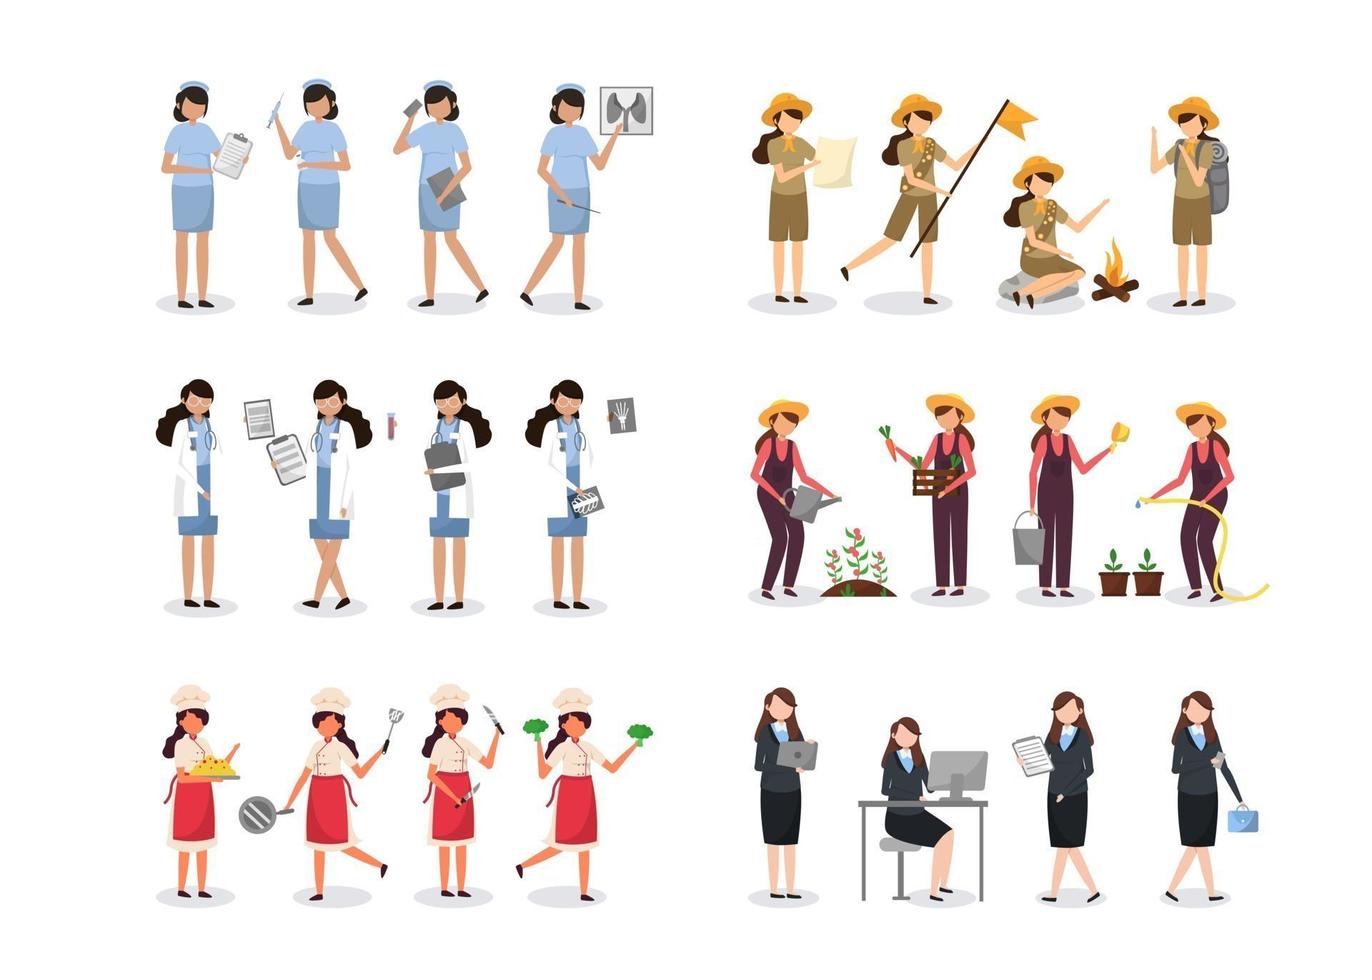 Bundle of 4 woman character sets, 16 poses of various professions, lifestyles vector